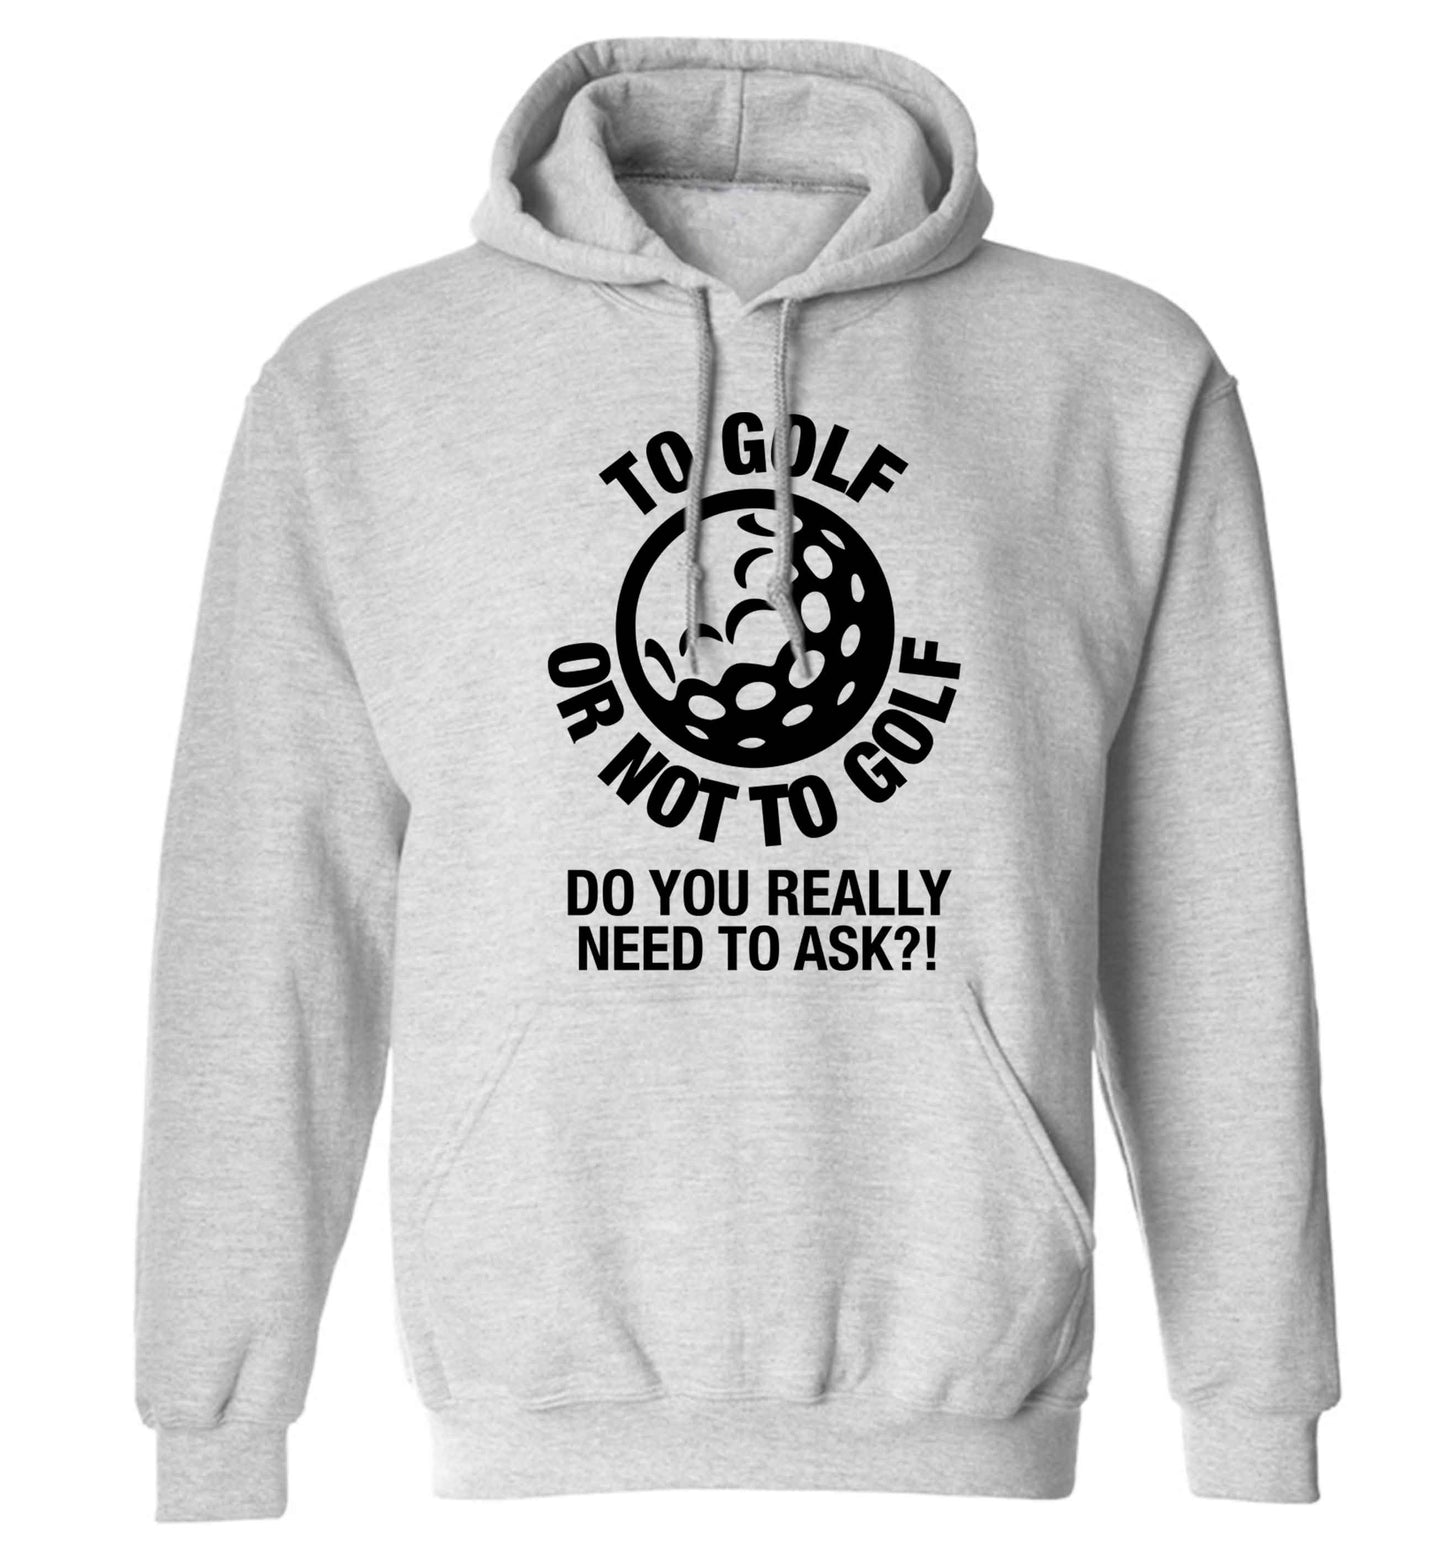 To golf or not to golf Do you really need to ask?! adults unisex grey hoodie 2XL